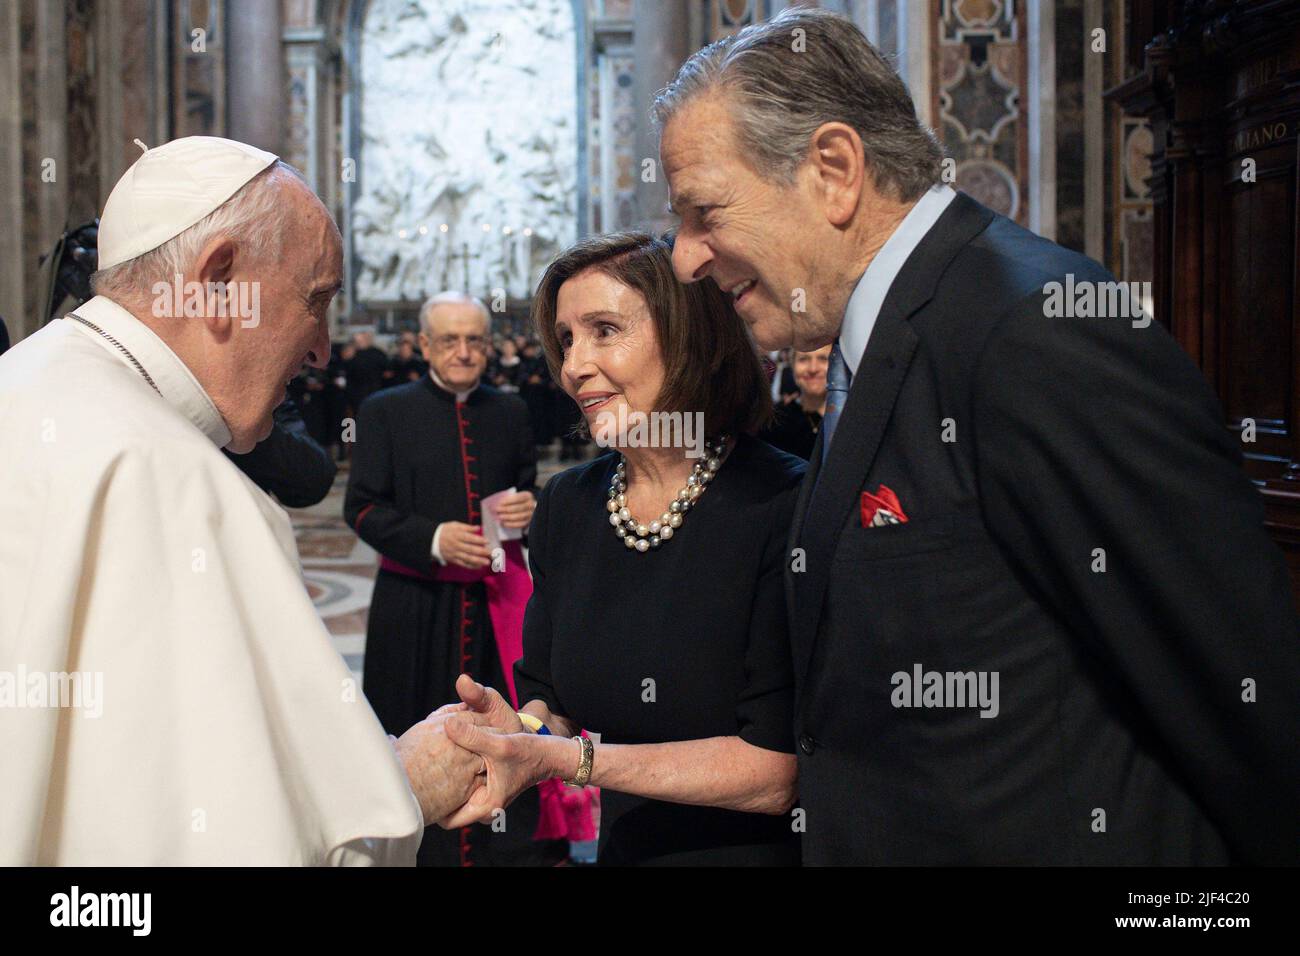 Vatican City, Vatican. 29 June 2022. Pope Francis greeting US House of Representatives Speaker, Nancy Pelosi  and her husband, before celebrating a Mass on the Solemnity of Saints Peter and Paul, in Saint Peter's Basilica.. (Photo by Vatican Media). Credit: Vatican Media/Picciarella/Alamy Live News Stock Photo